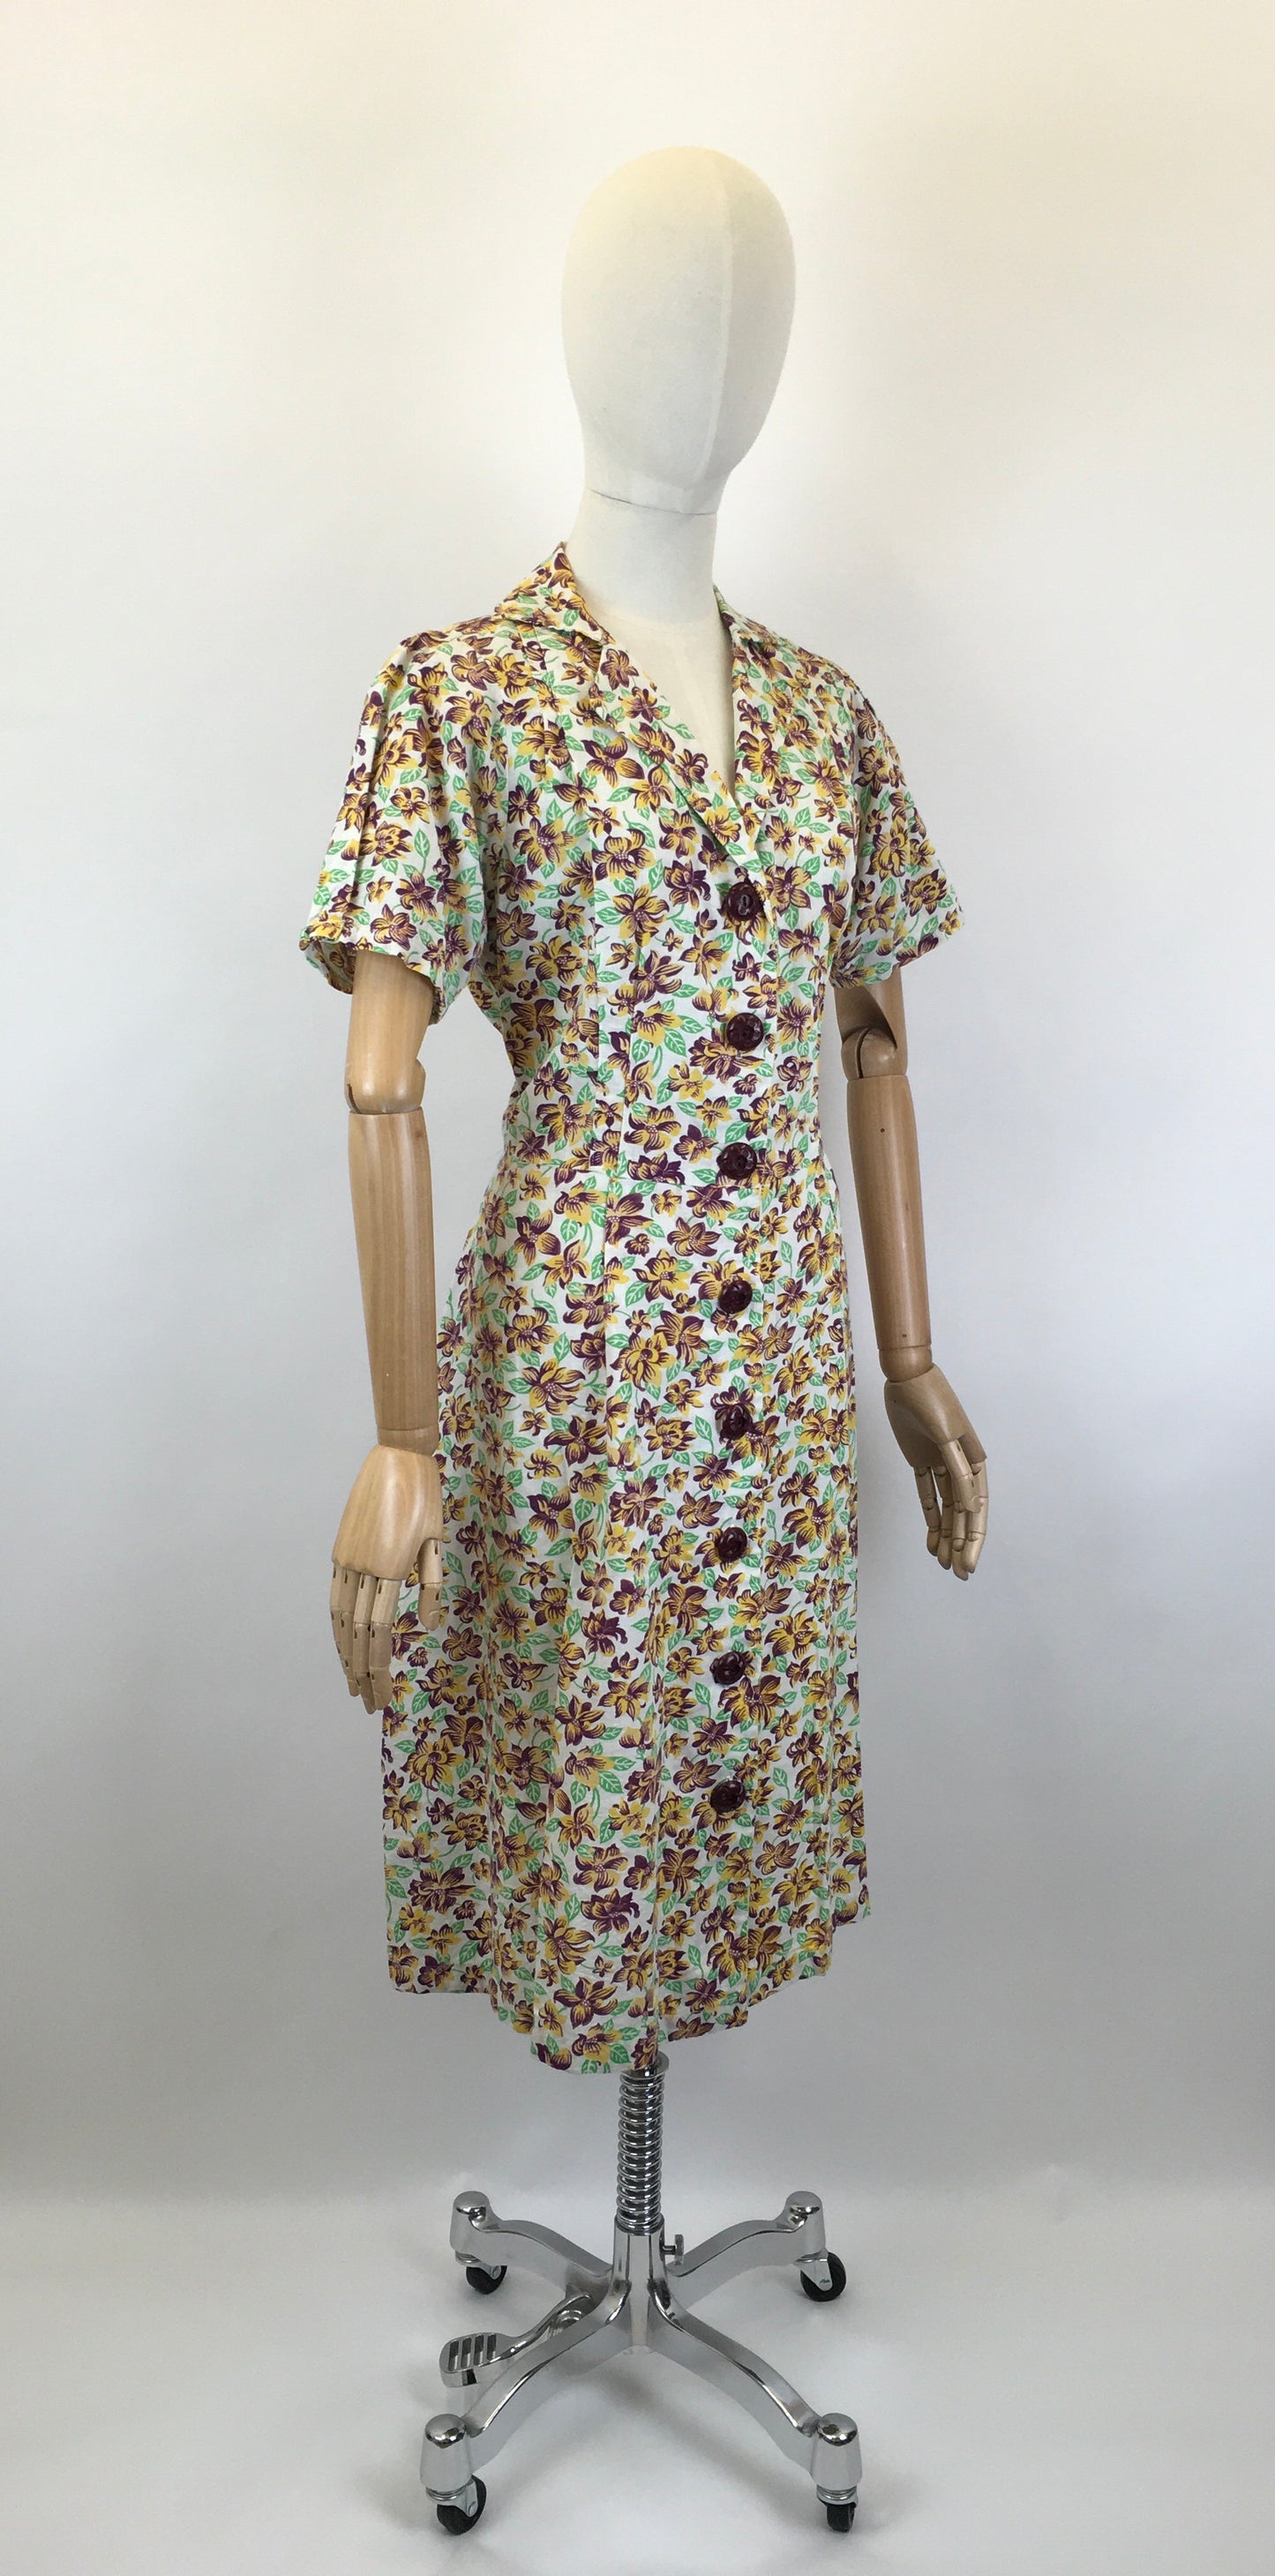 Original Late 1930’s Floral Print Button Down Front Dress - In Yellows, Maroons and Greens on Ivory